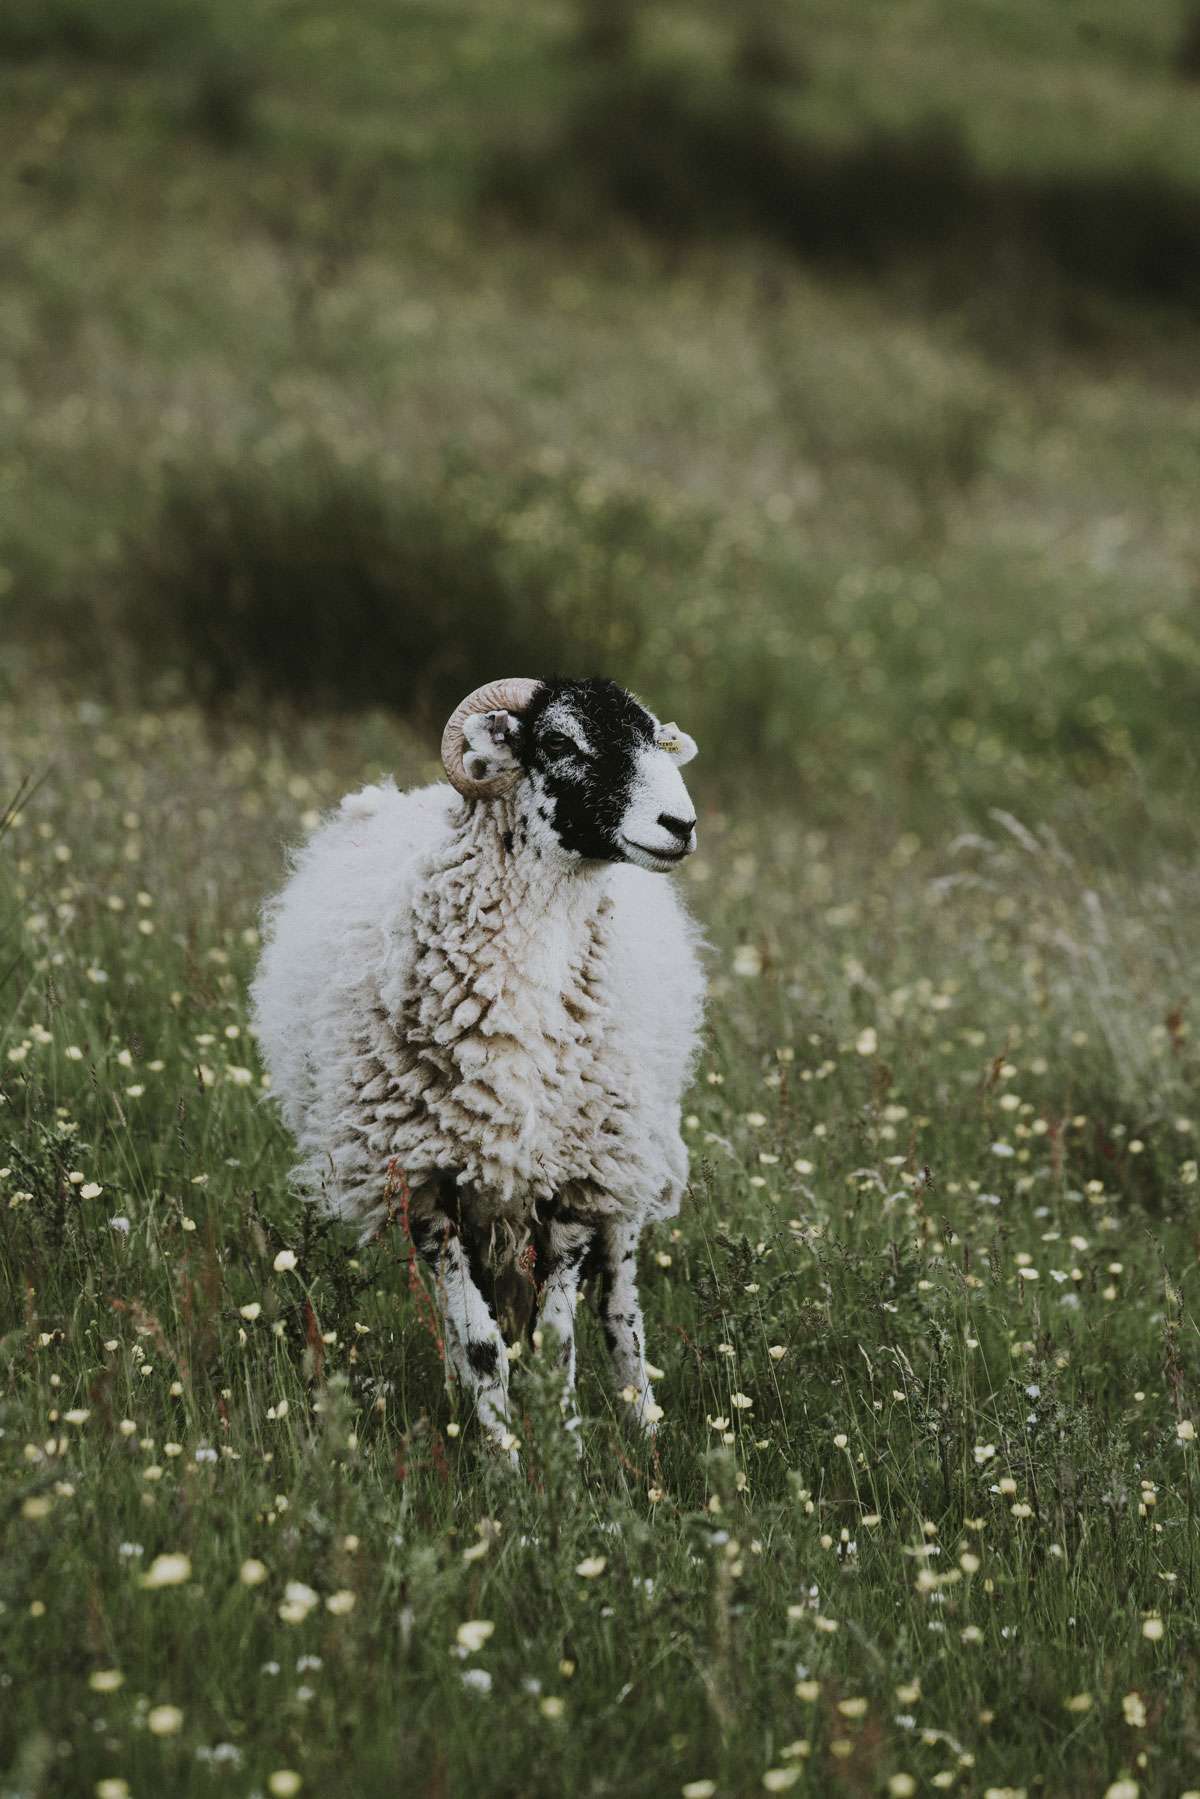 sheep standing in paddock of grass looking into distance